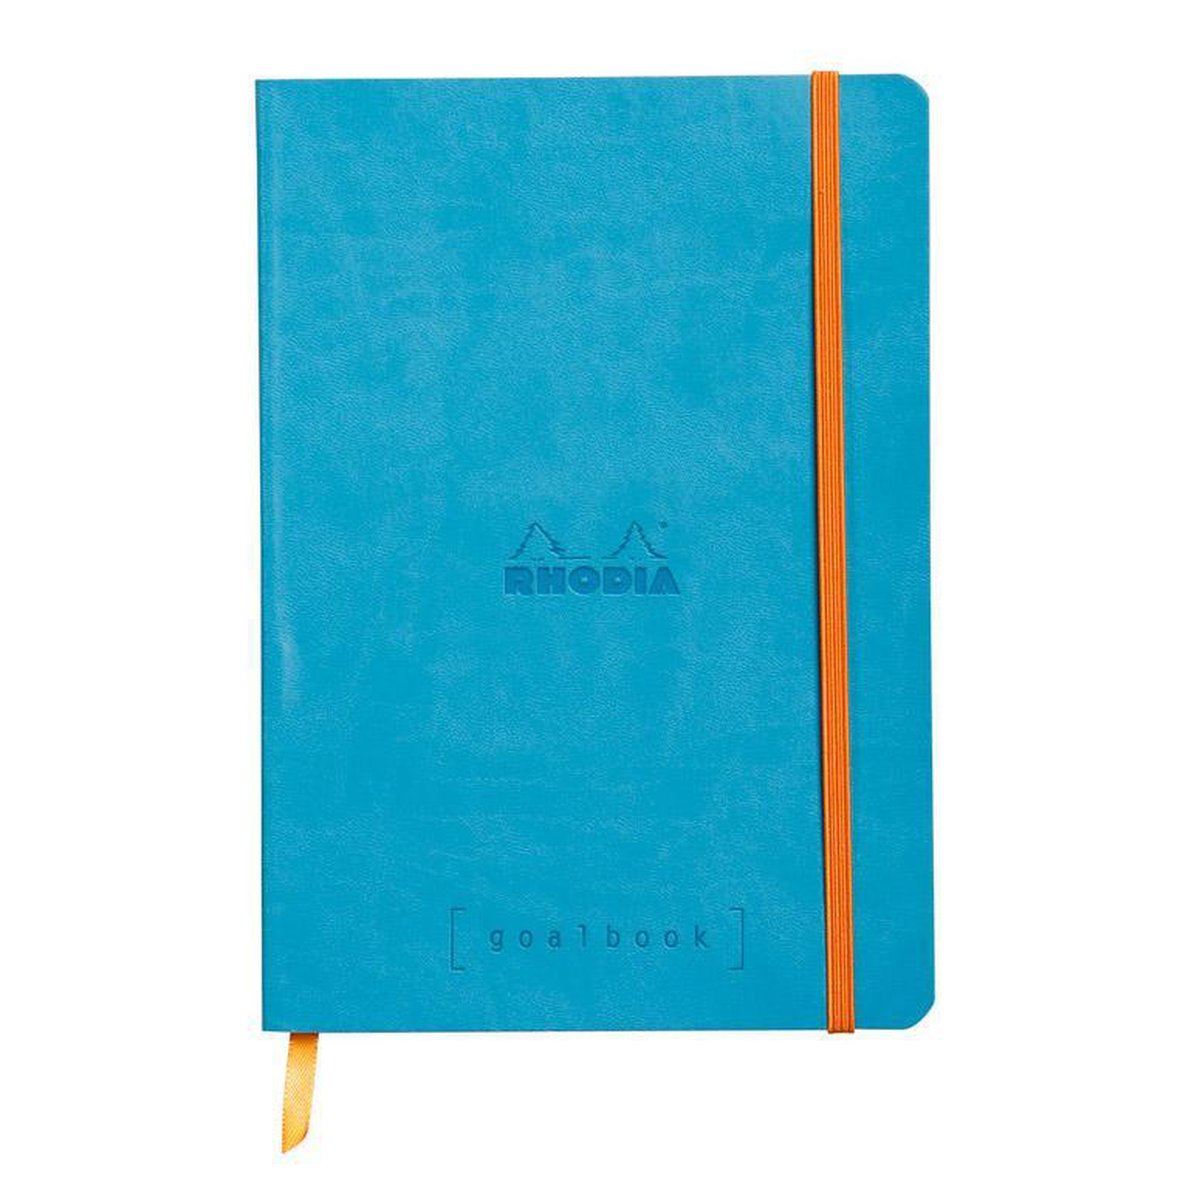 Rhodia Goalbook – Bullet Journal – A5 – 14,8x21cm – Softcover – Gestippeld – Dotted – Turquoise [Wit Papier]